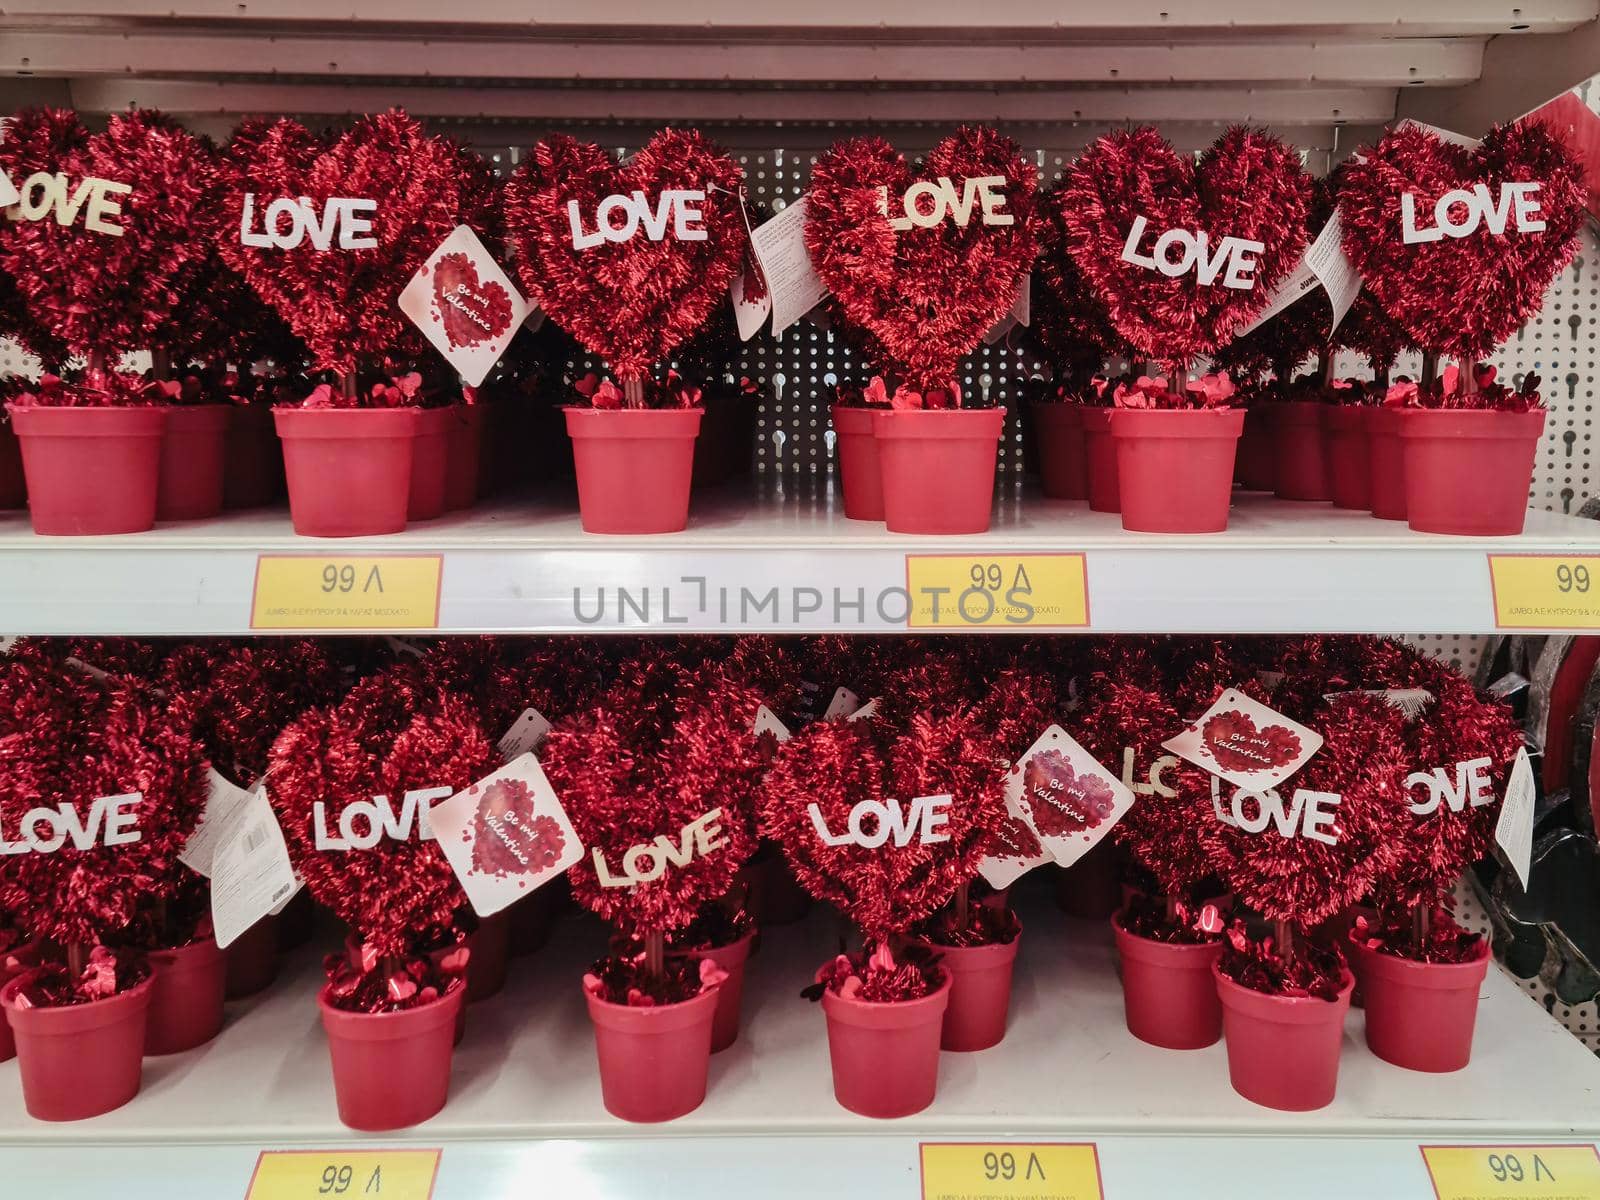 Interior of romantic love decor items on flower pots, sold as gifts for February 14 feast.